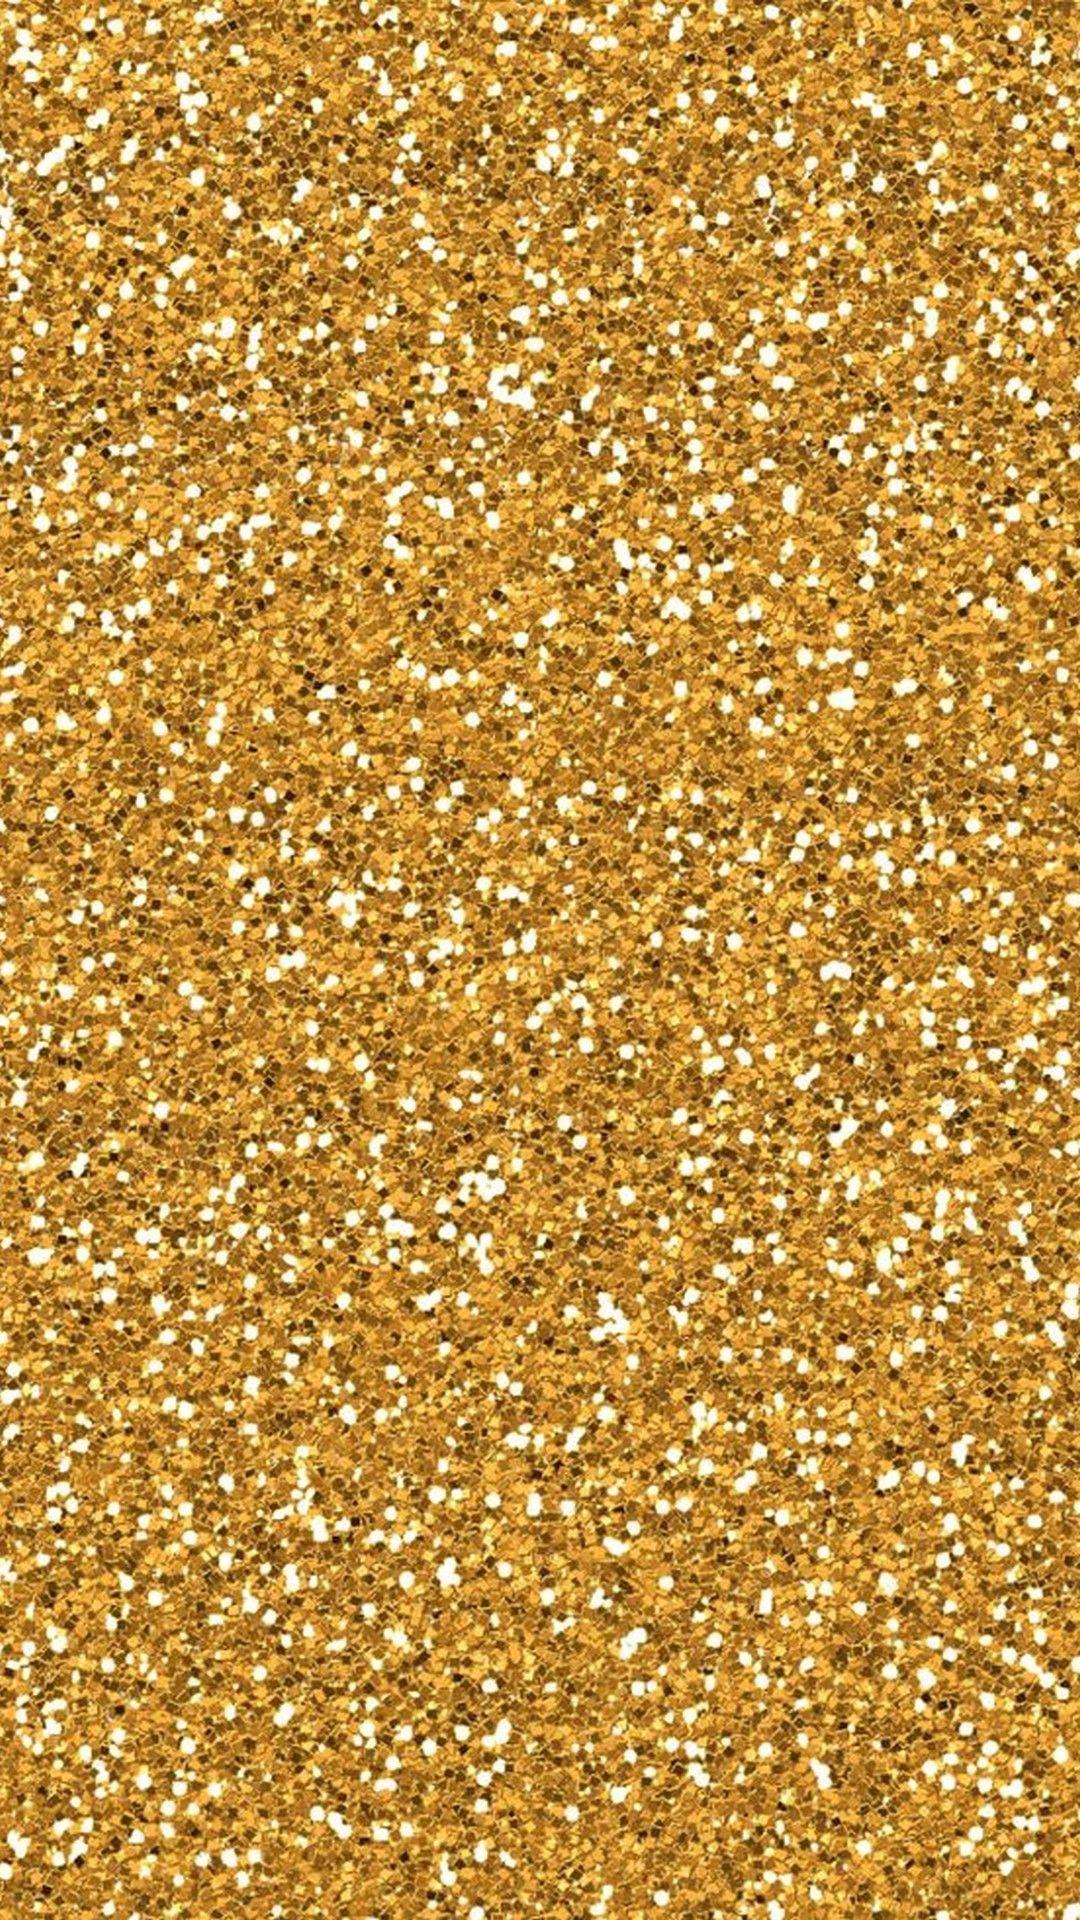 Gold Glitter Background For Android. Gold glitter